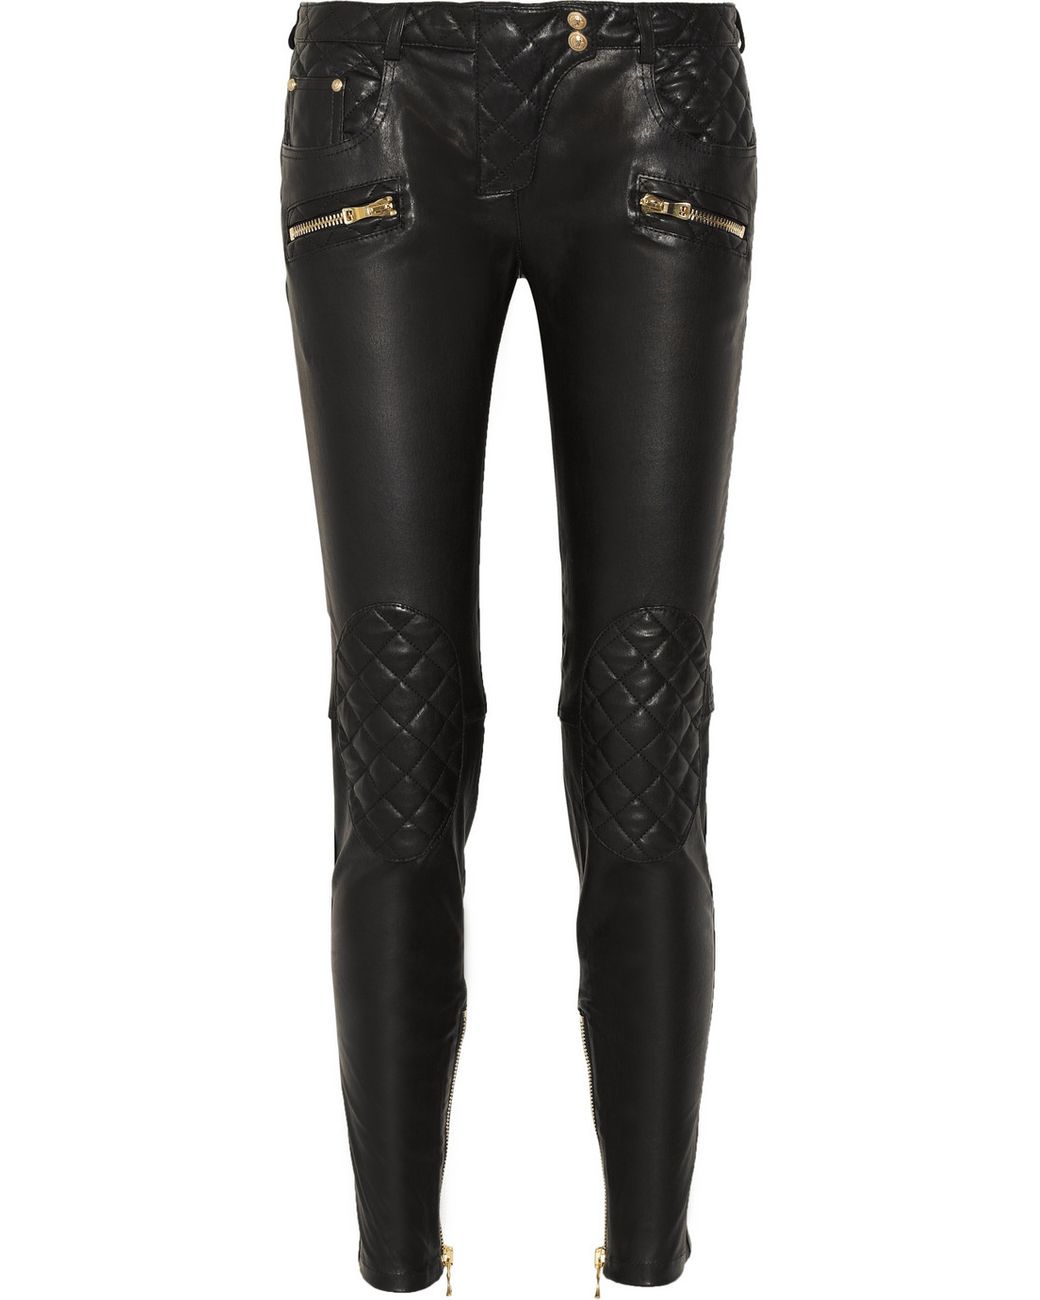 Balmain Quilted Leather Skinny Pants in Black